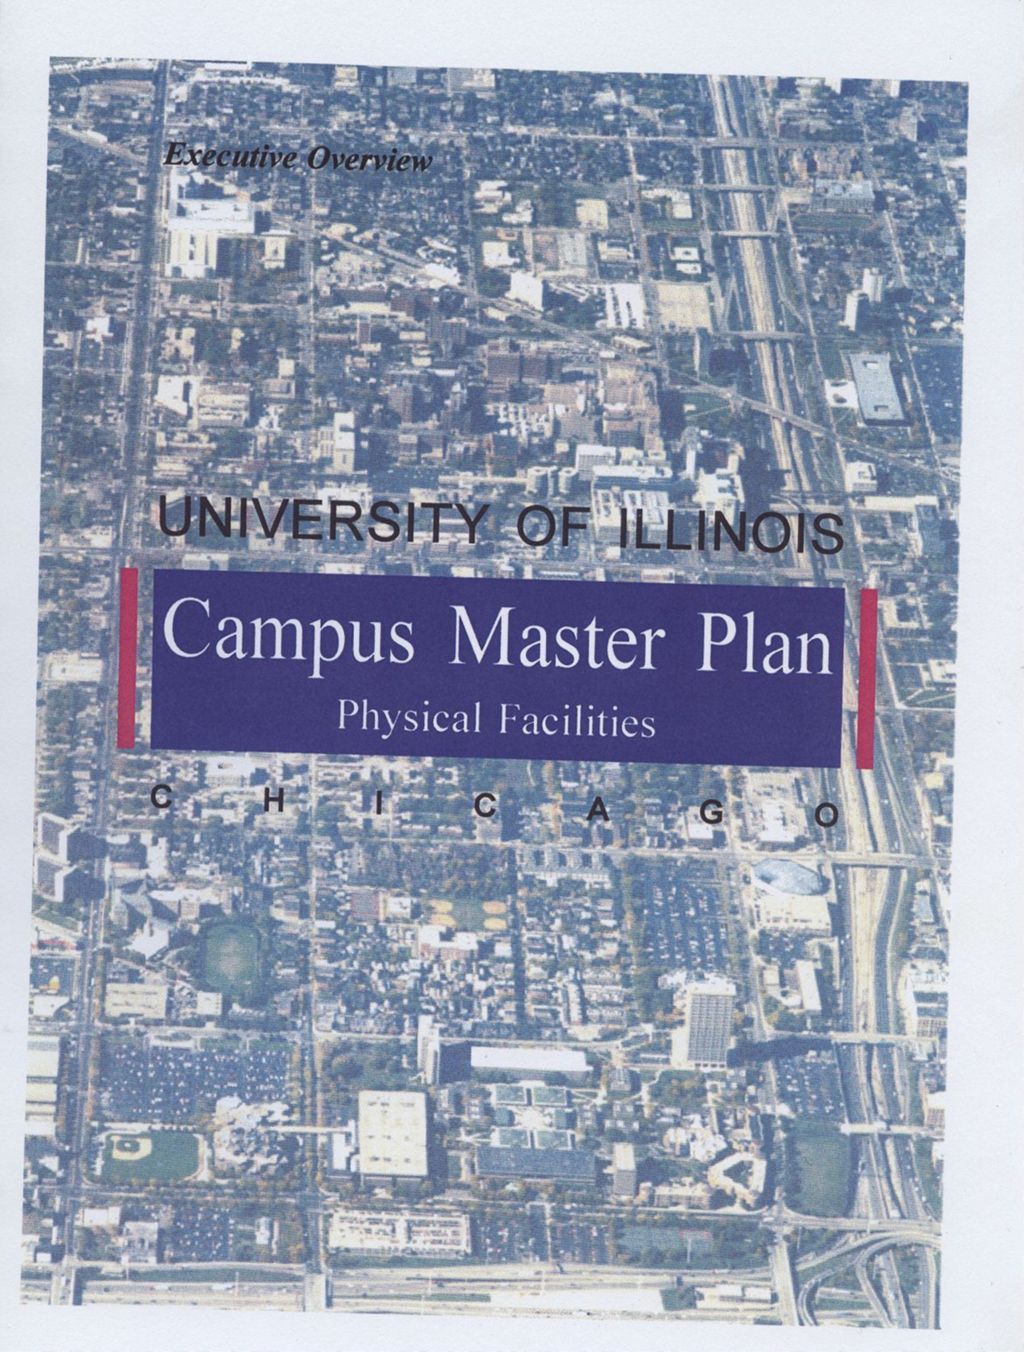 University of Illinois Chicago, Campus Master Plan, Physical Facilities. Executive Overview